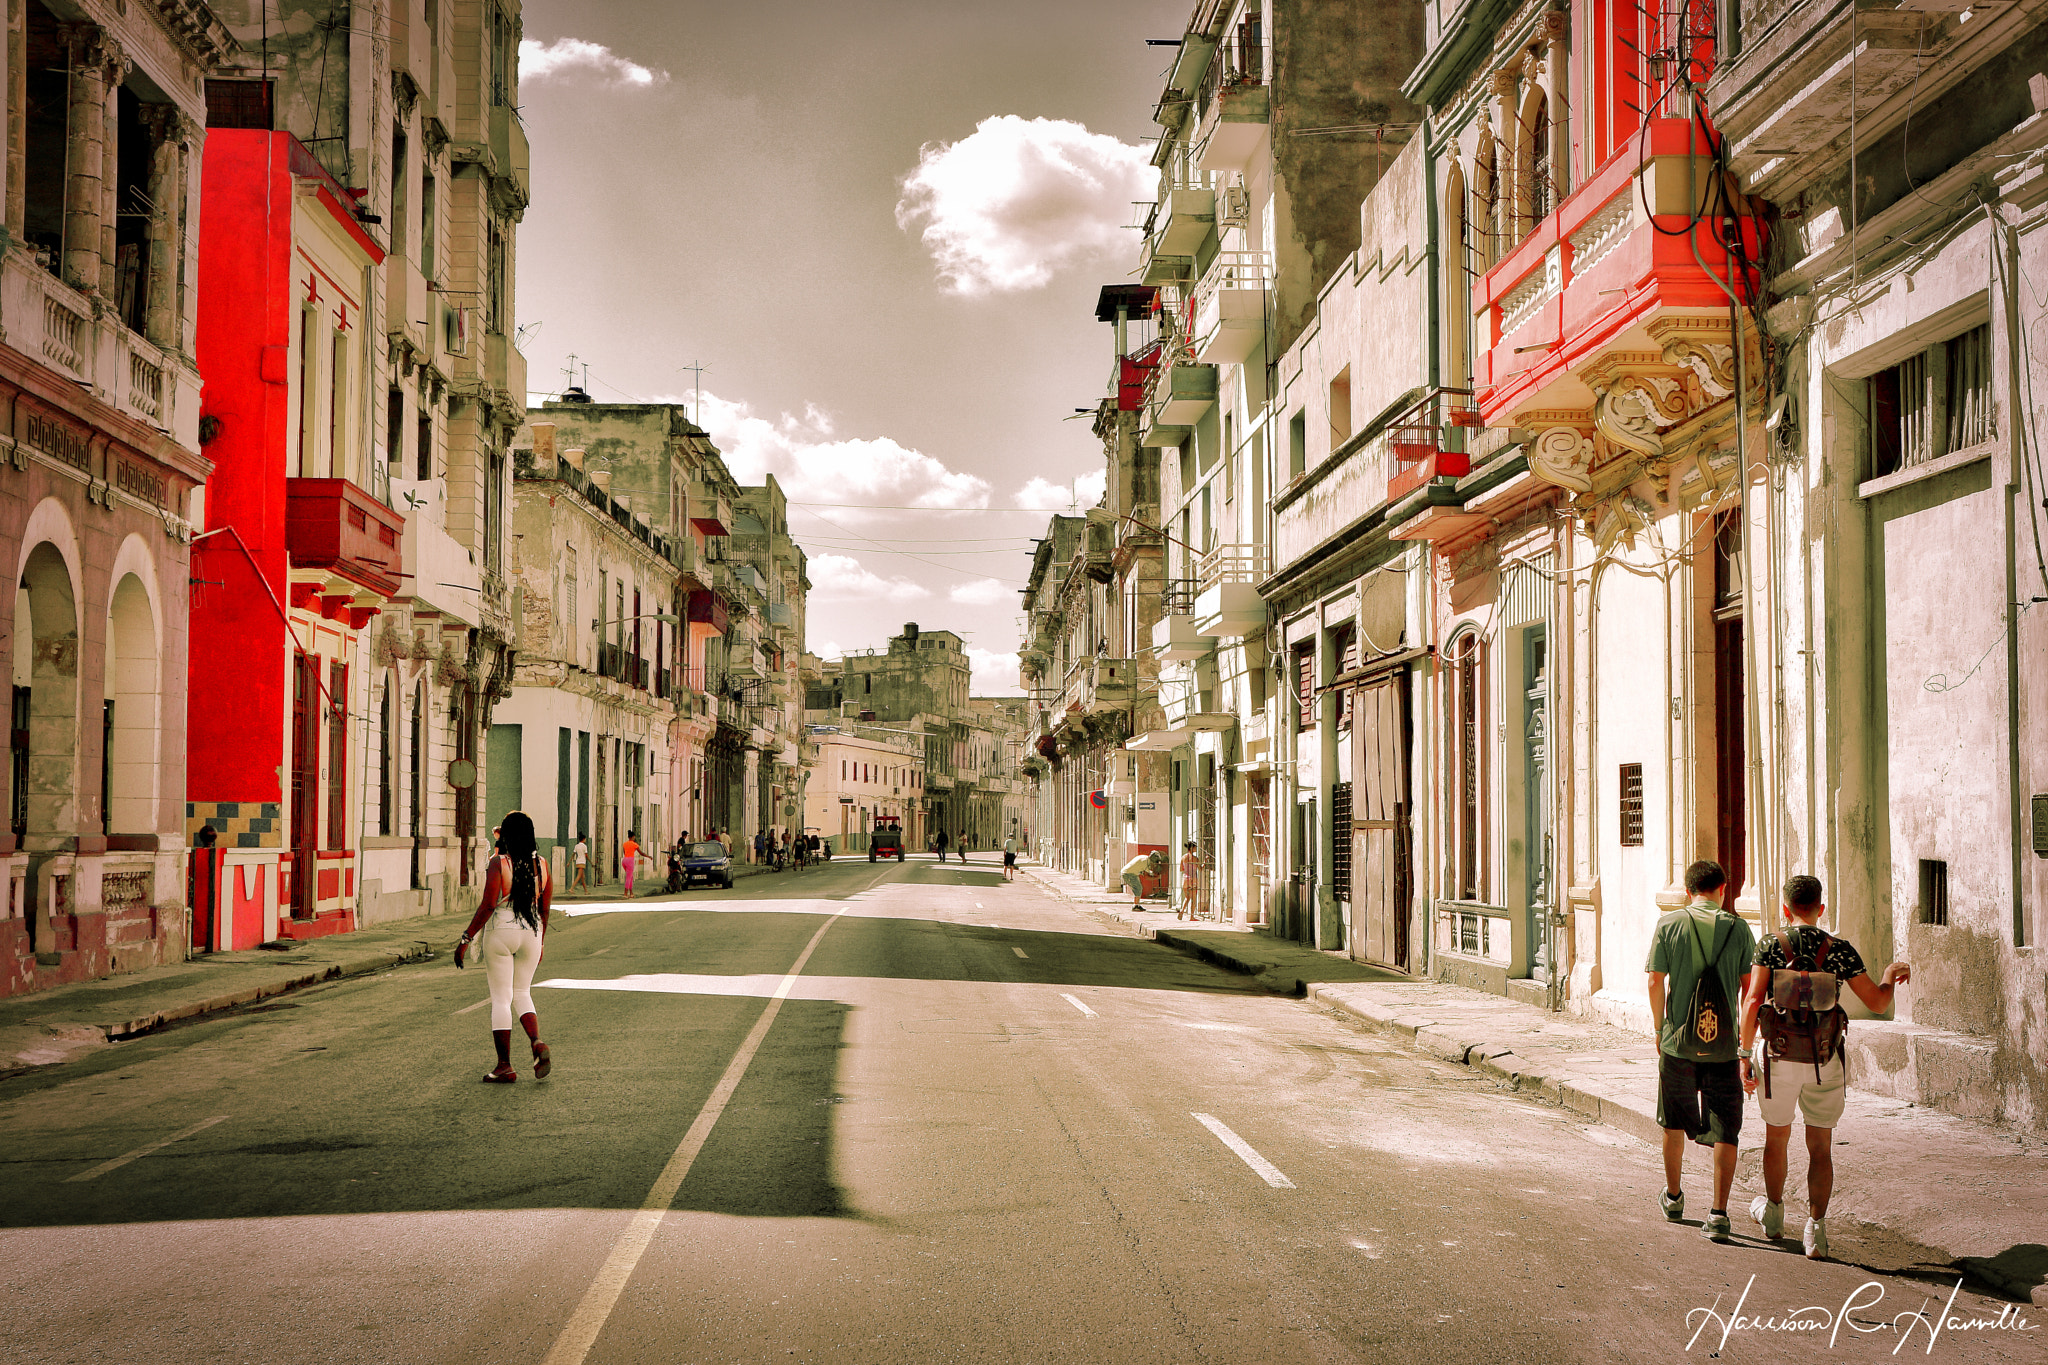 Hasselblad Lunar sample photo. Early morning in havana photography